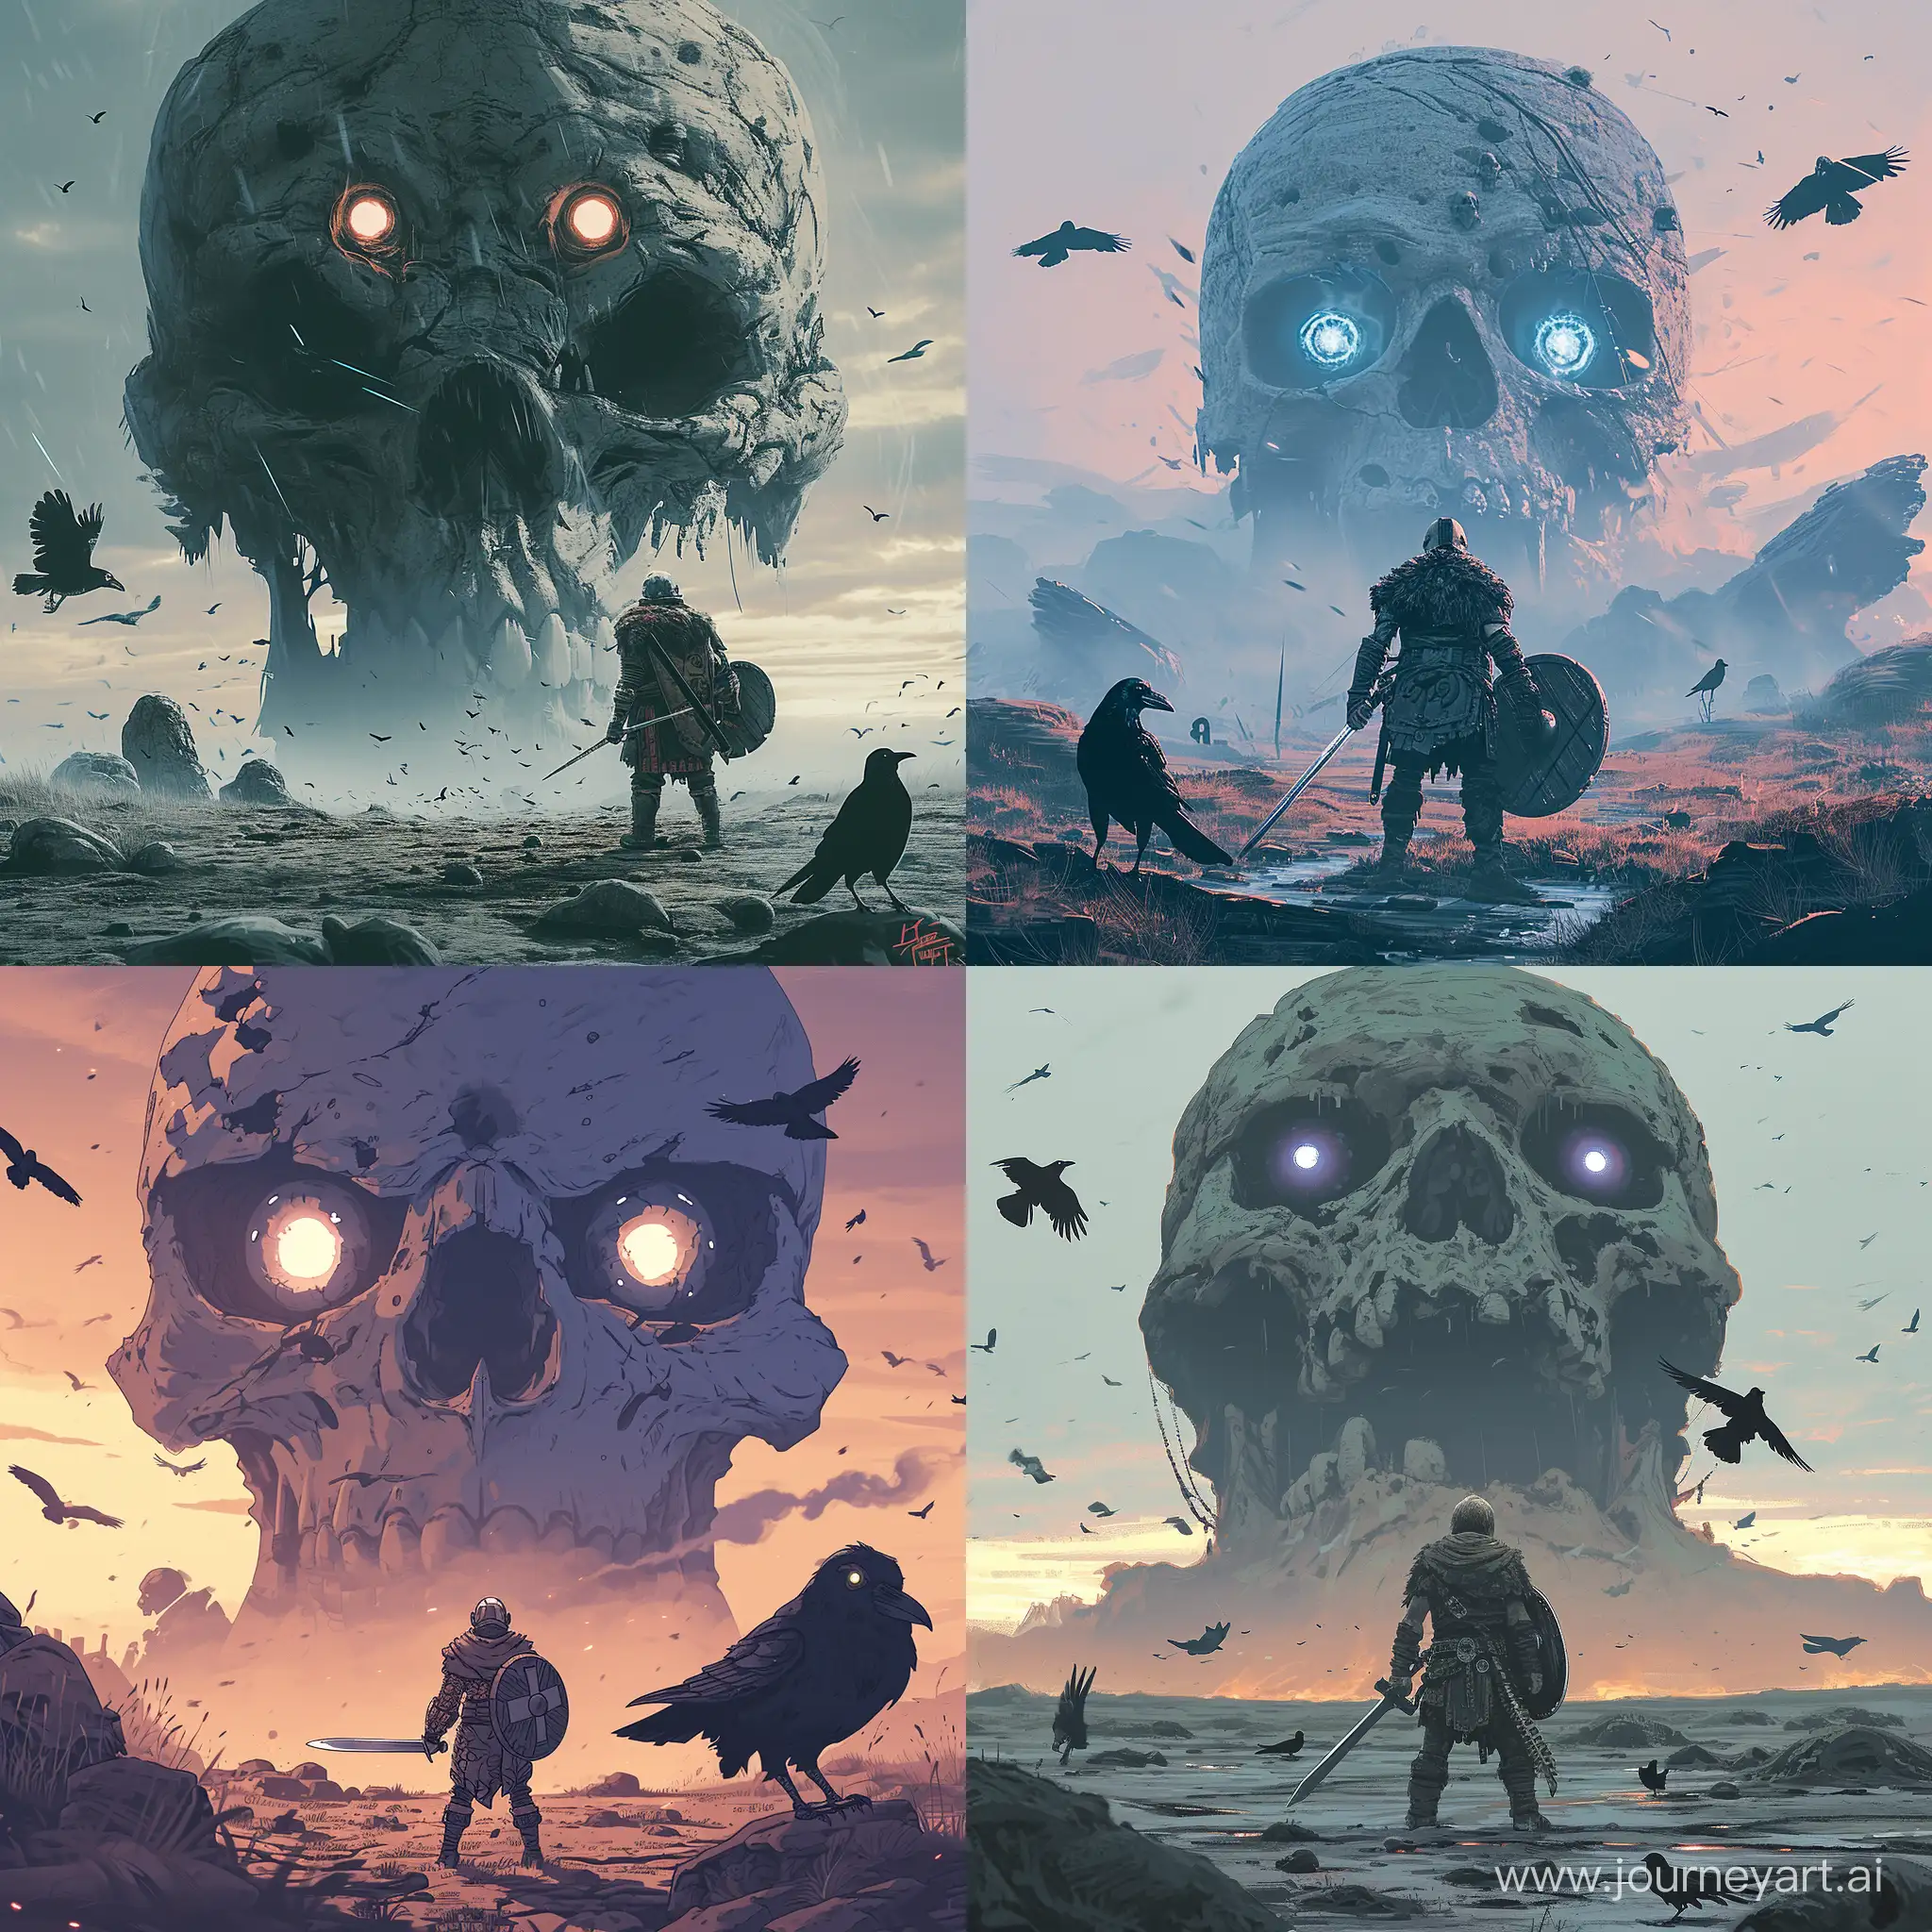  kawaii, cute, a warrior stands in a desolate land with a cute giant skull looming above them. The warrior is equipped with a sword and shield, there is a cute skull with glowing eyes in the background. The scene is set at dusk, there are crows flying around, kawaii, cute, высокое разрешение, высокая чёткость, чёткое изображение, микро детализация, высокая детализация, ультра реализация, максимальная детализация, много деталей, глубокие детали, детальное изображение, четкие линии. --v 6